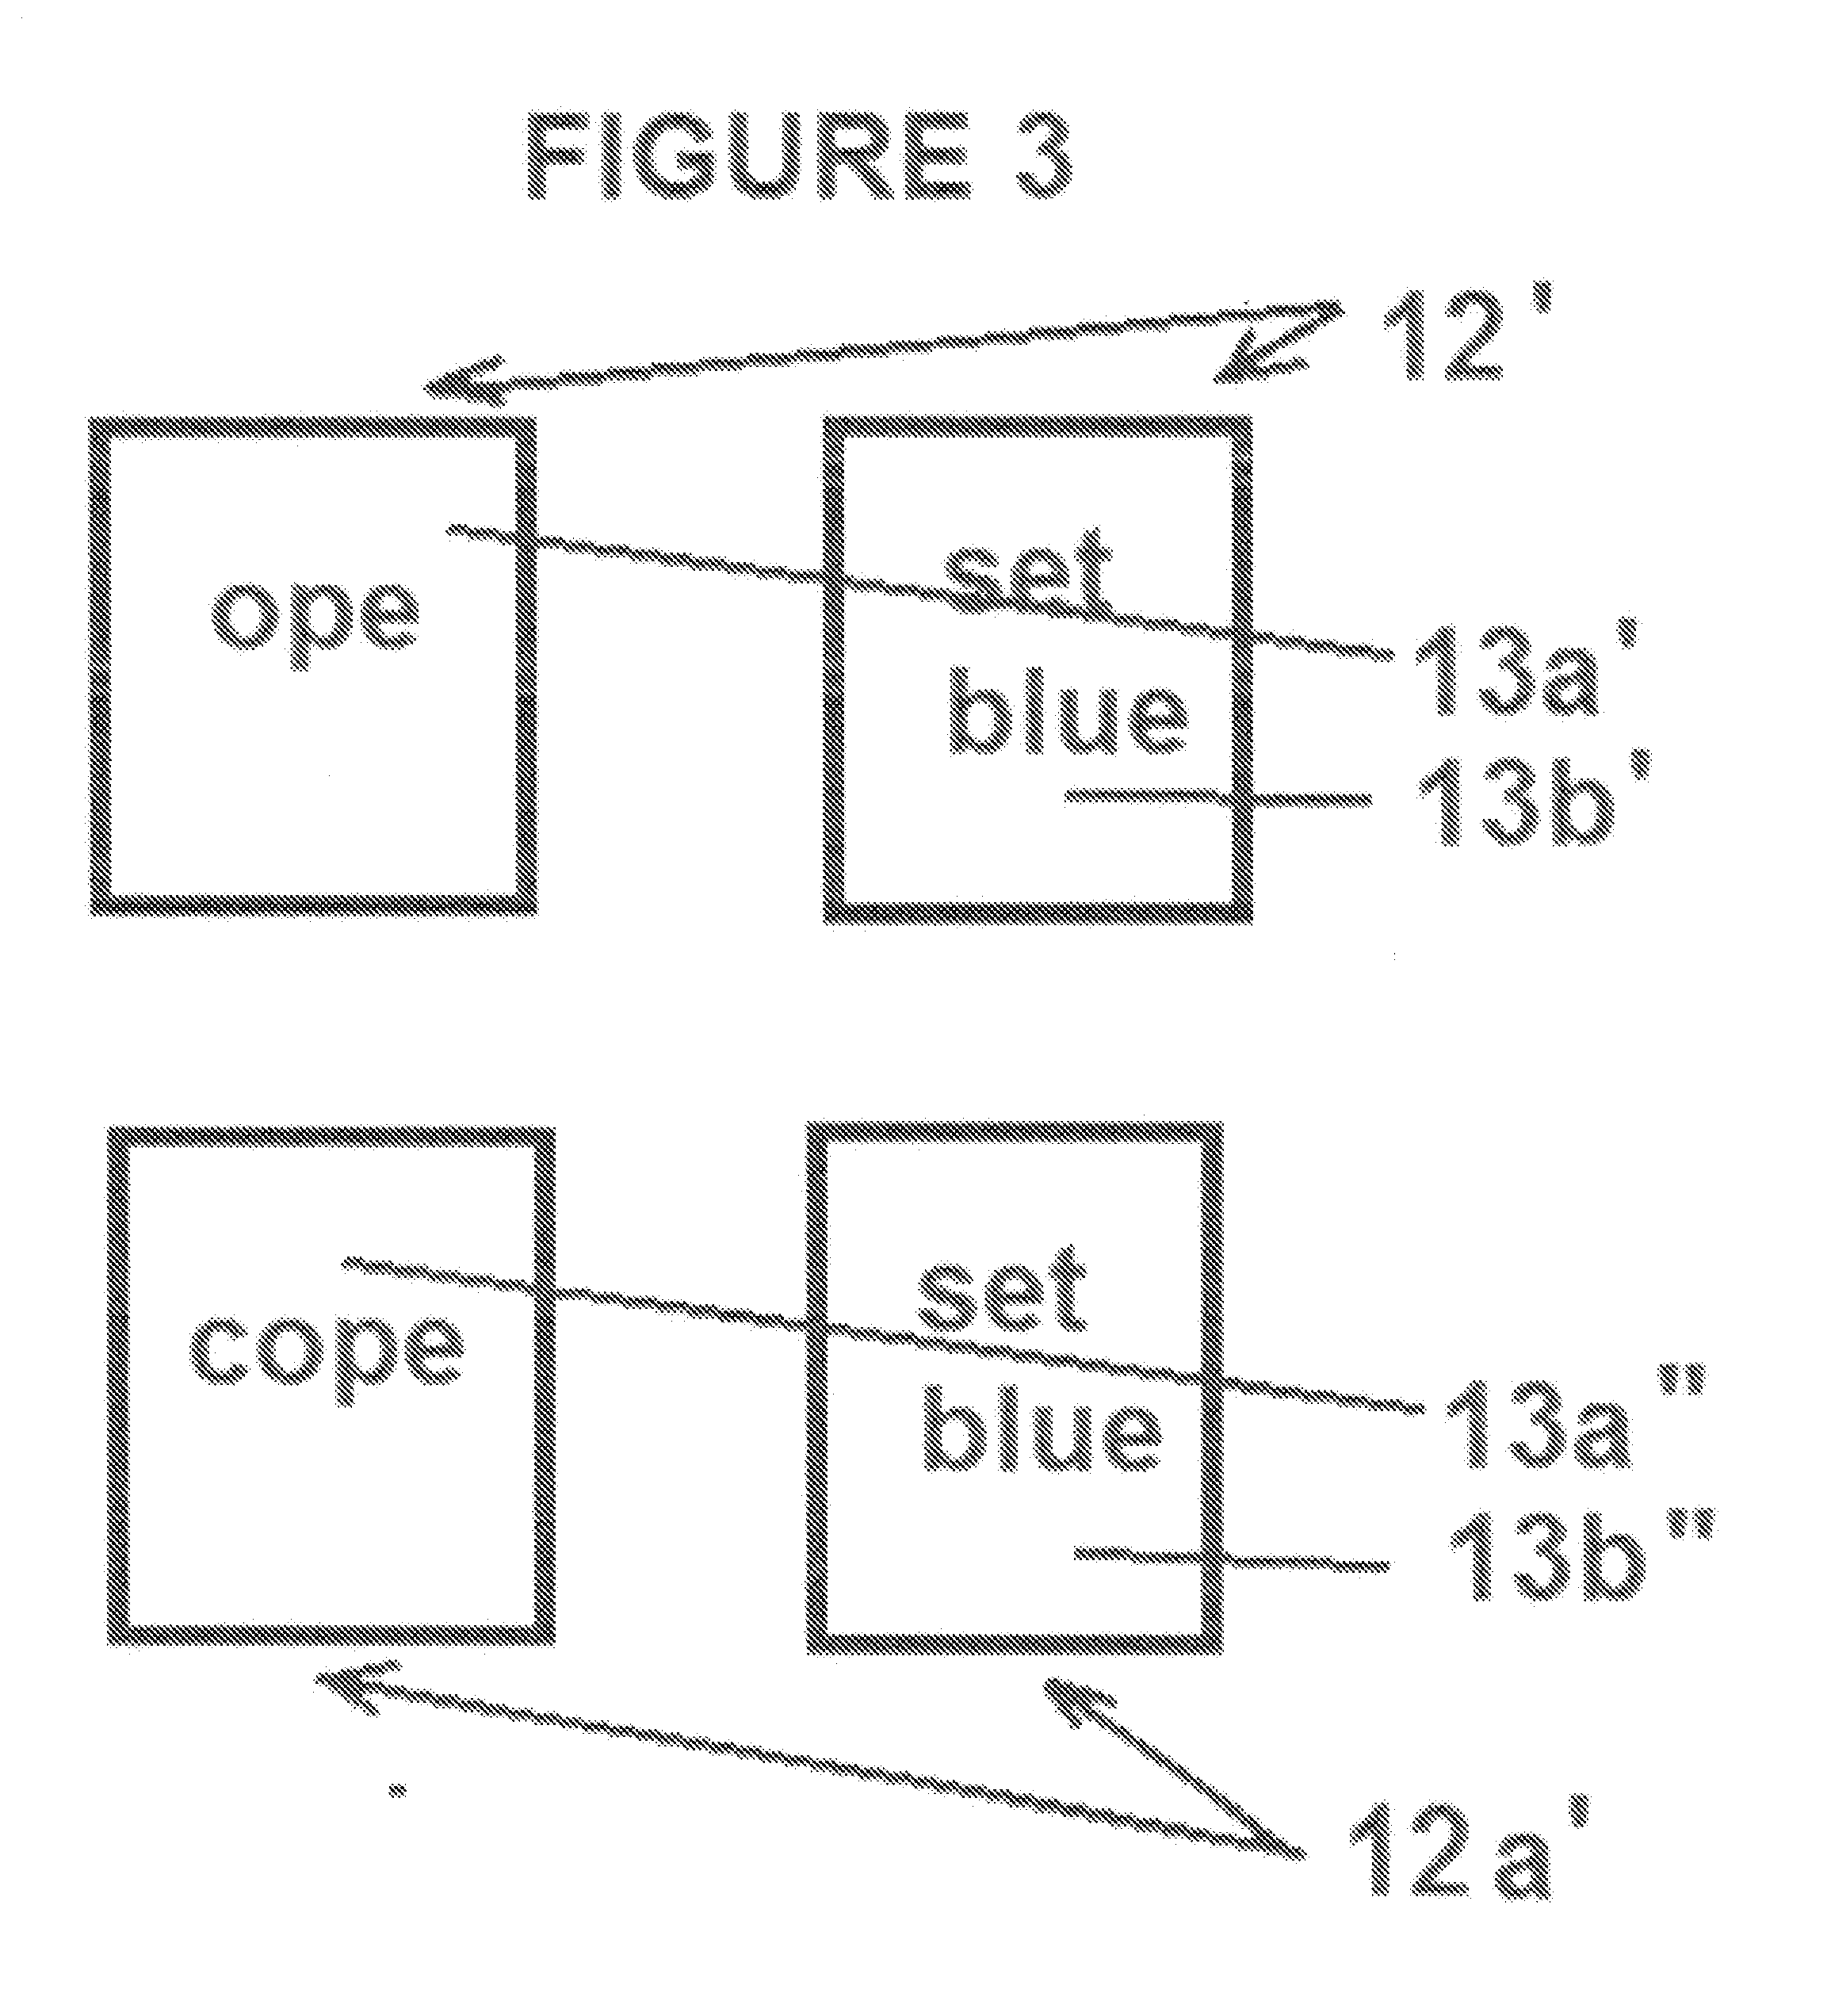 Educational card game system and method of use